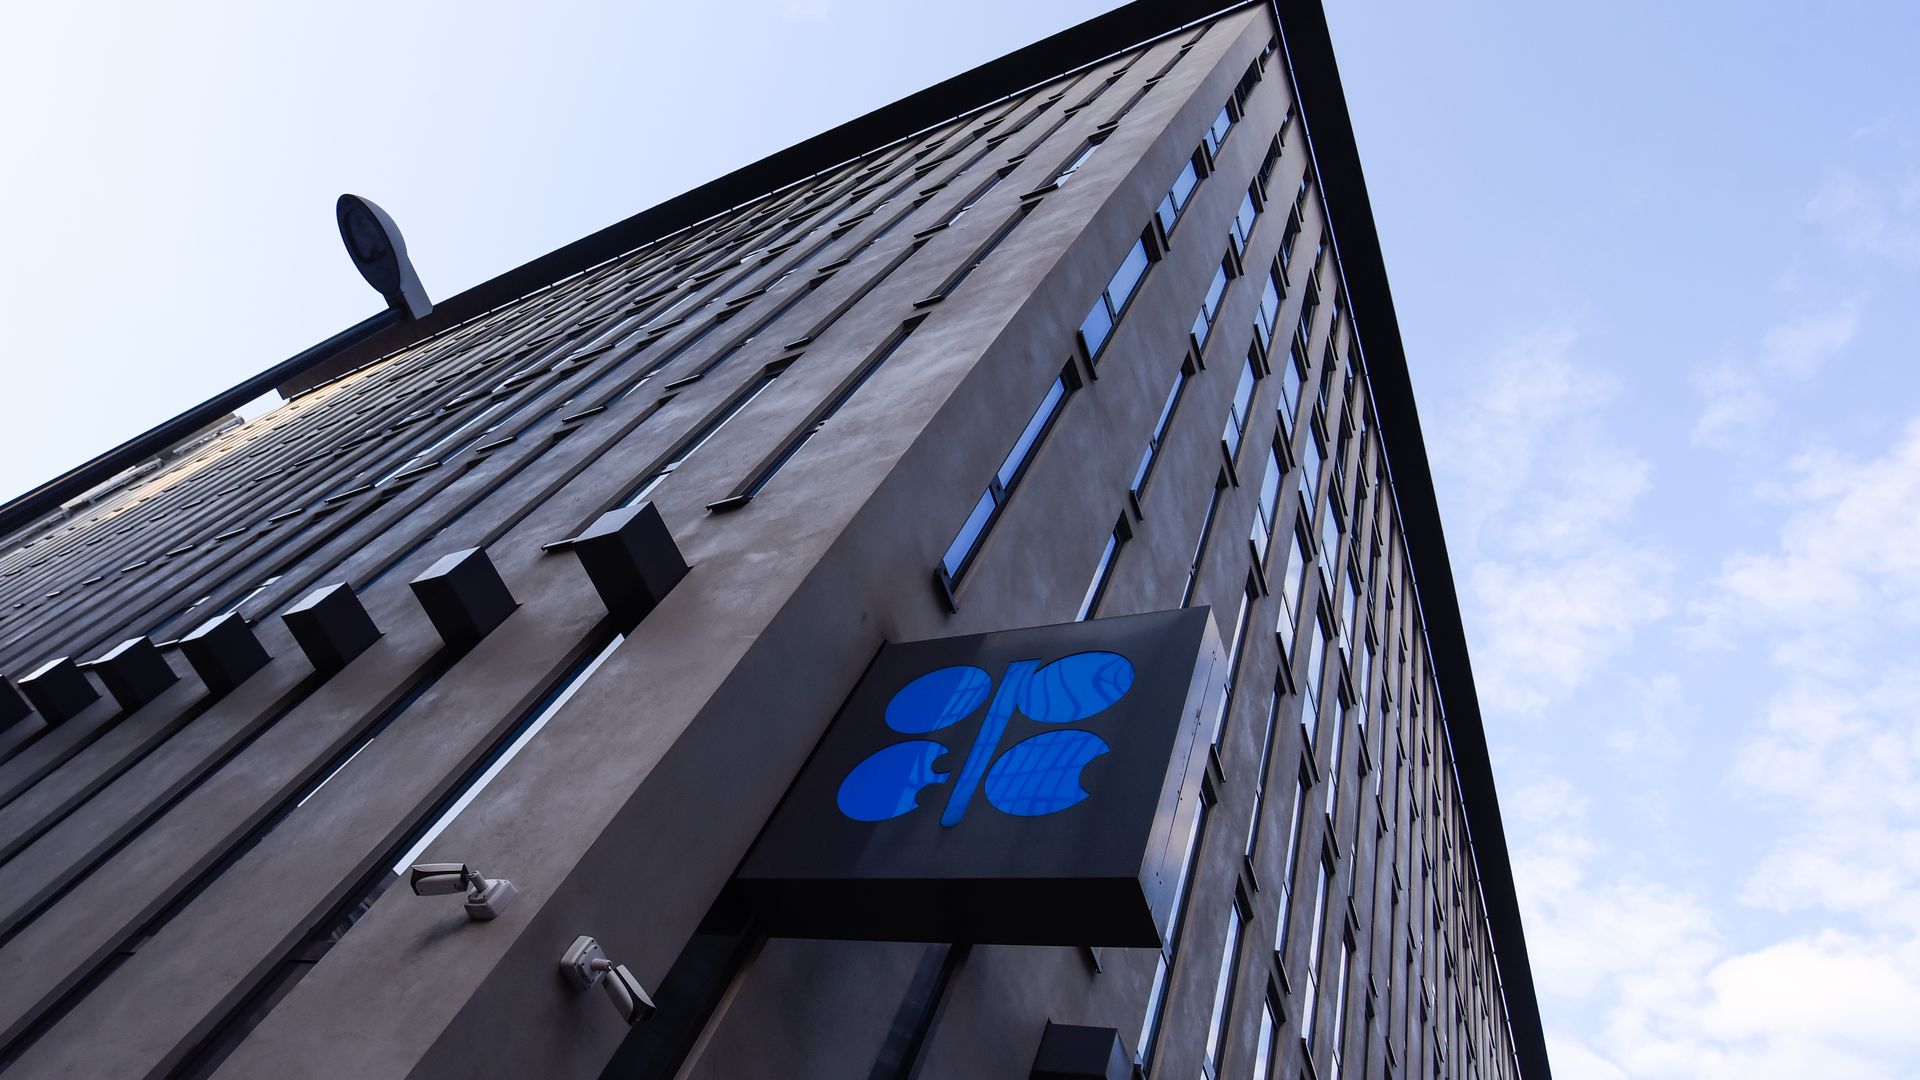 OPEC's logo on the side of its headquarters in Vienna in 2019.